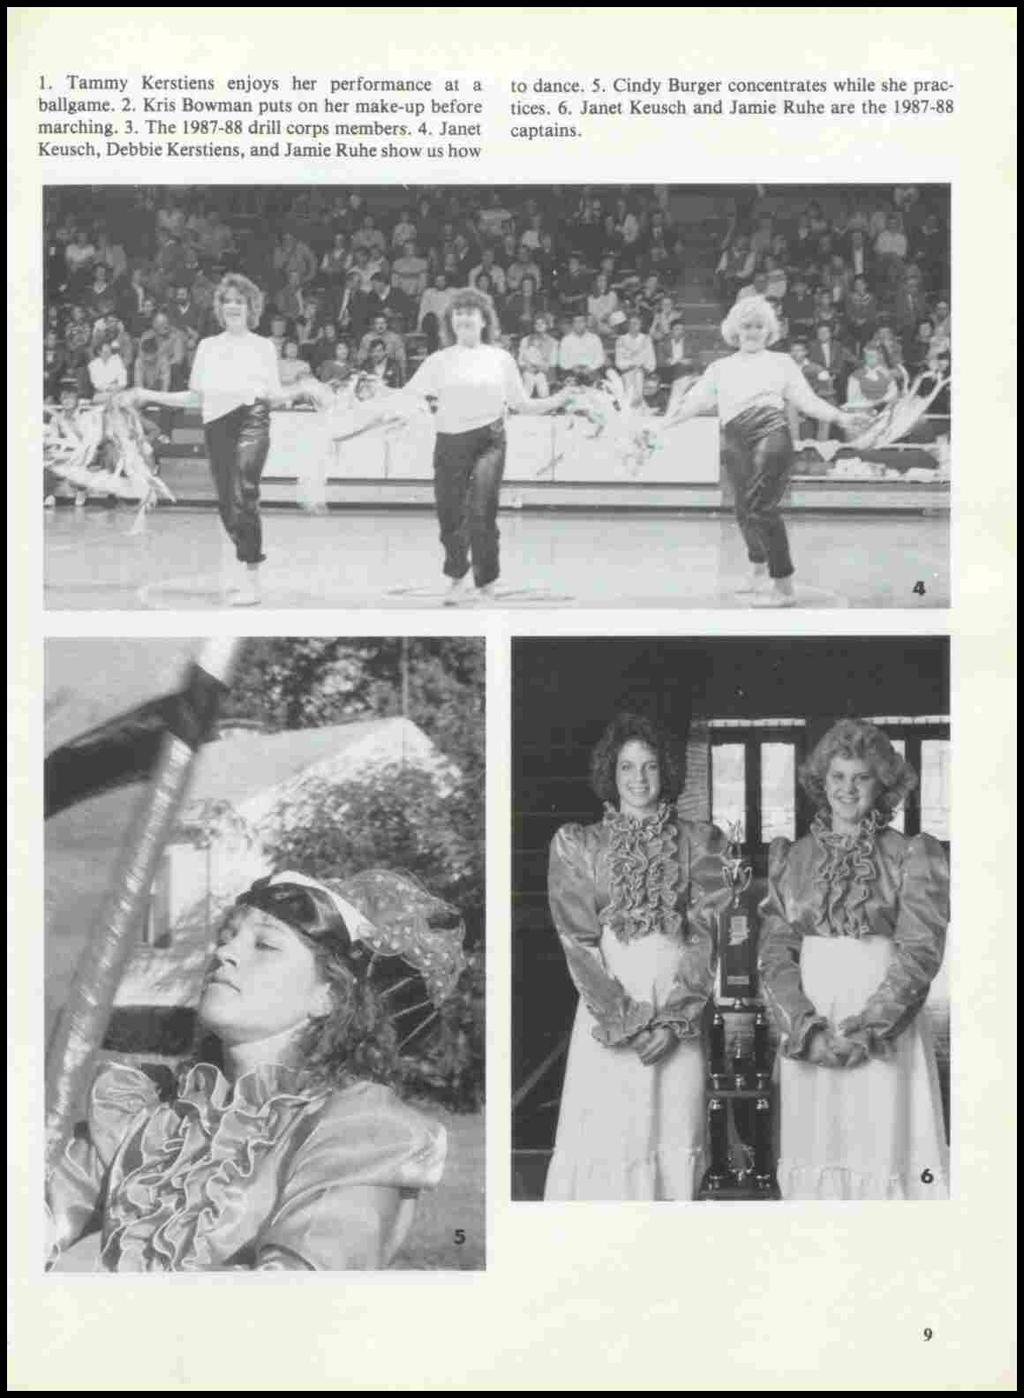 1. Tammy Kerstiens enjoys her performance at a ballgame. 2. Kris Bowman puts on her make-up before marching. 3. The 1987-88 drill corps members-. 4.